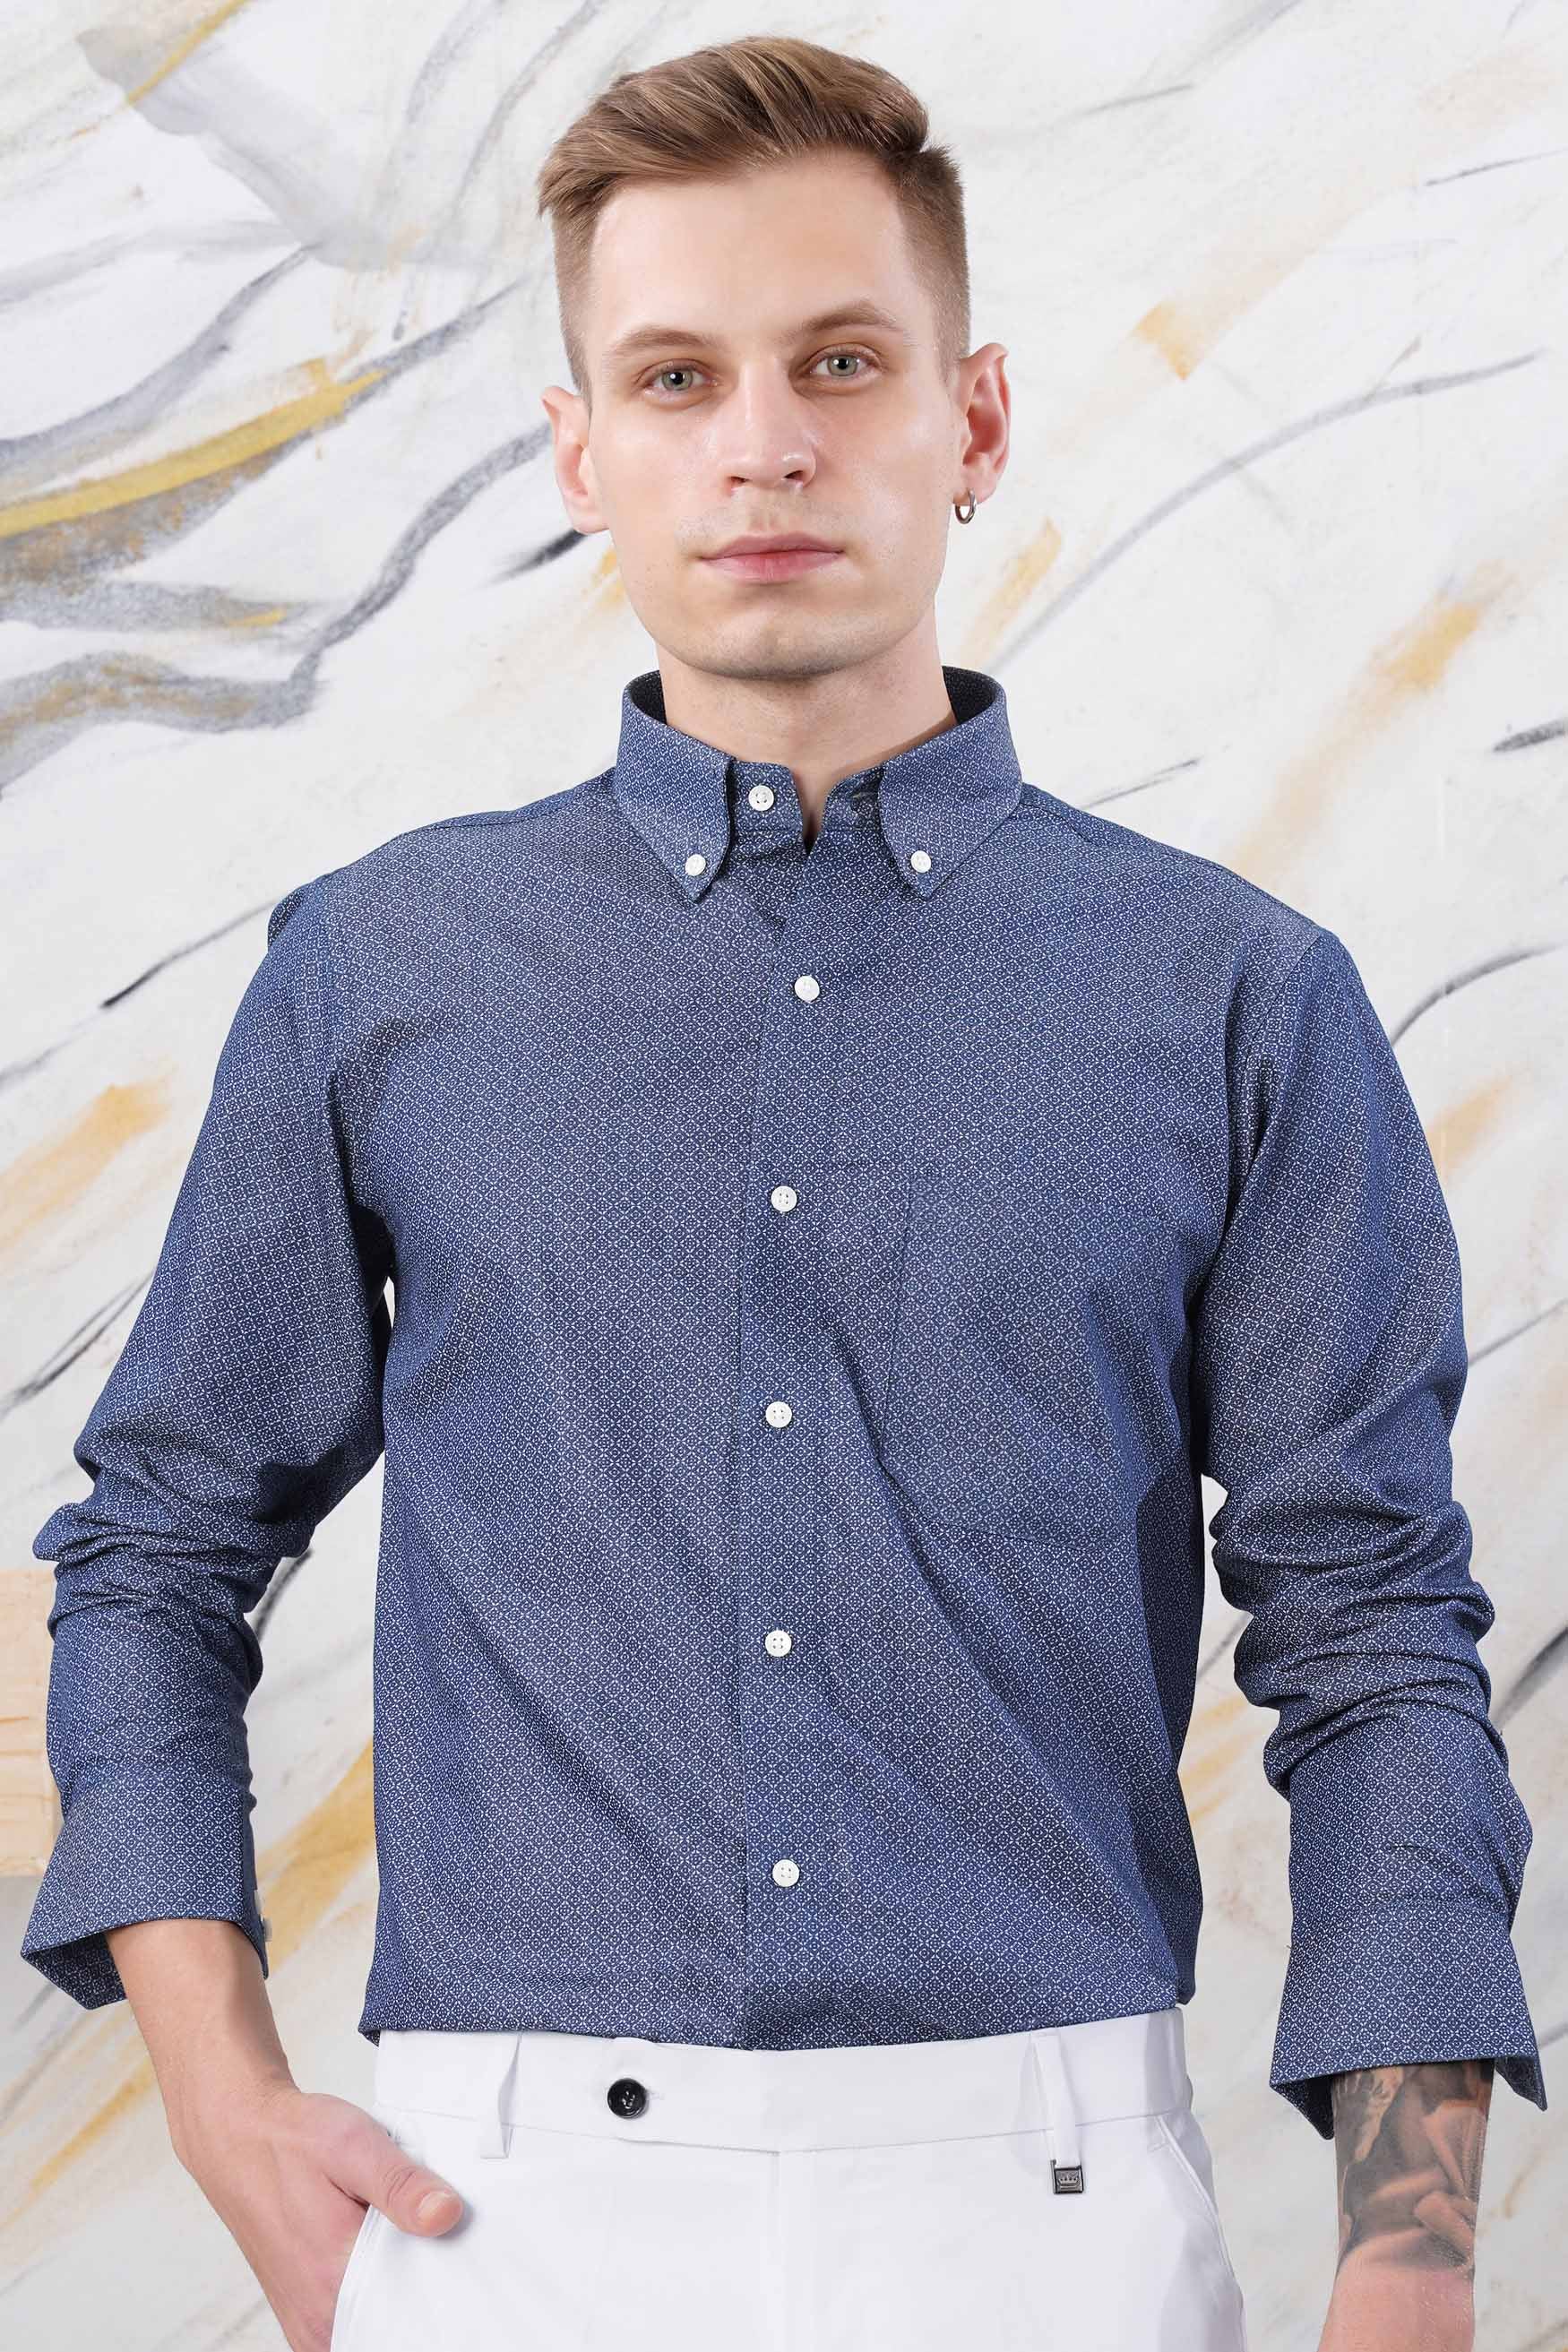 Cloud Burst Blue and Botticelli Blue Printed Chambray Shirt